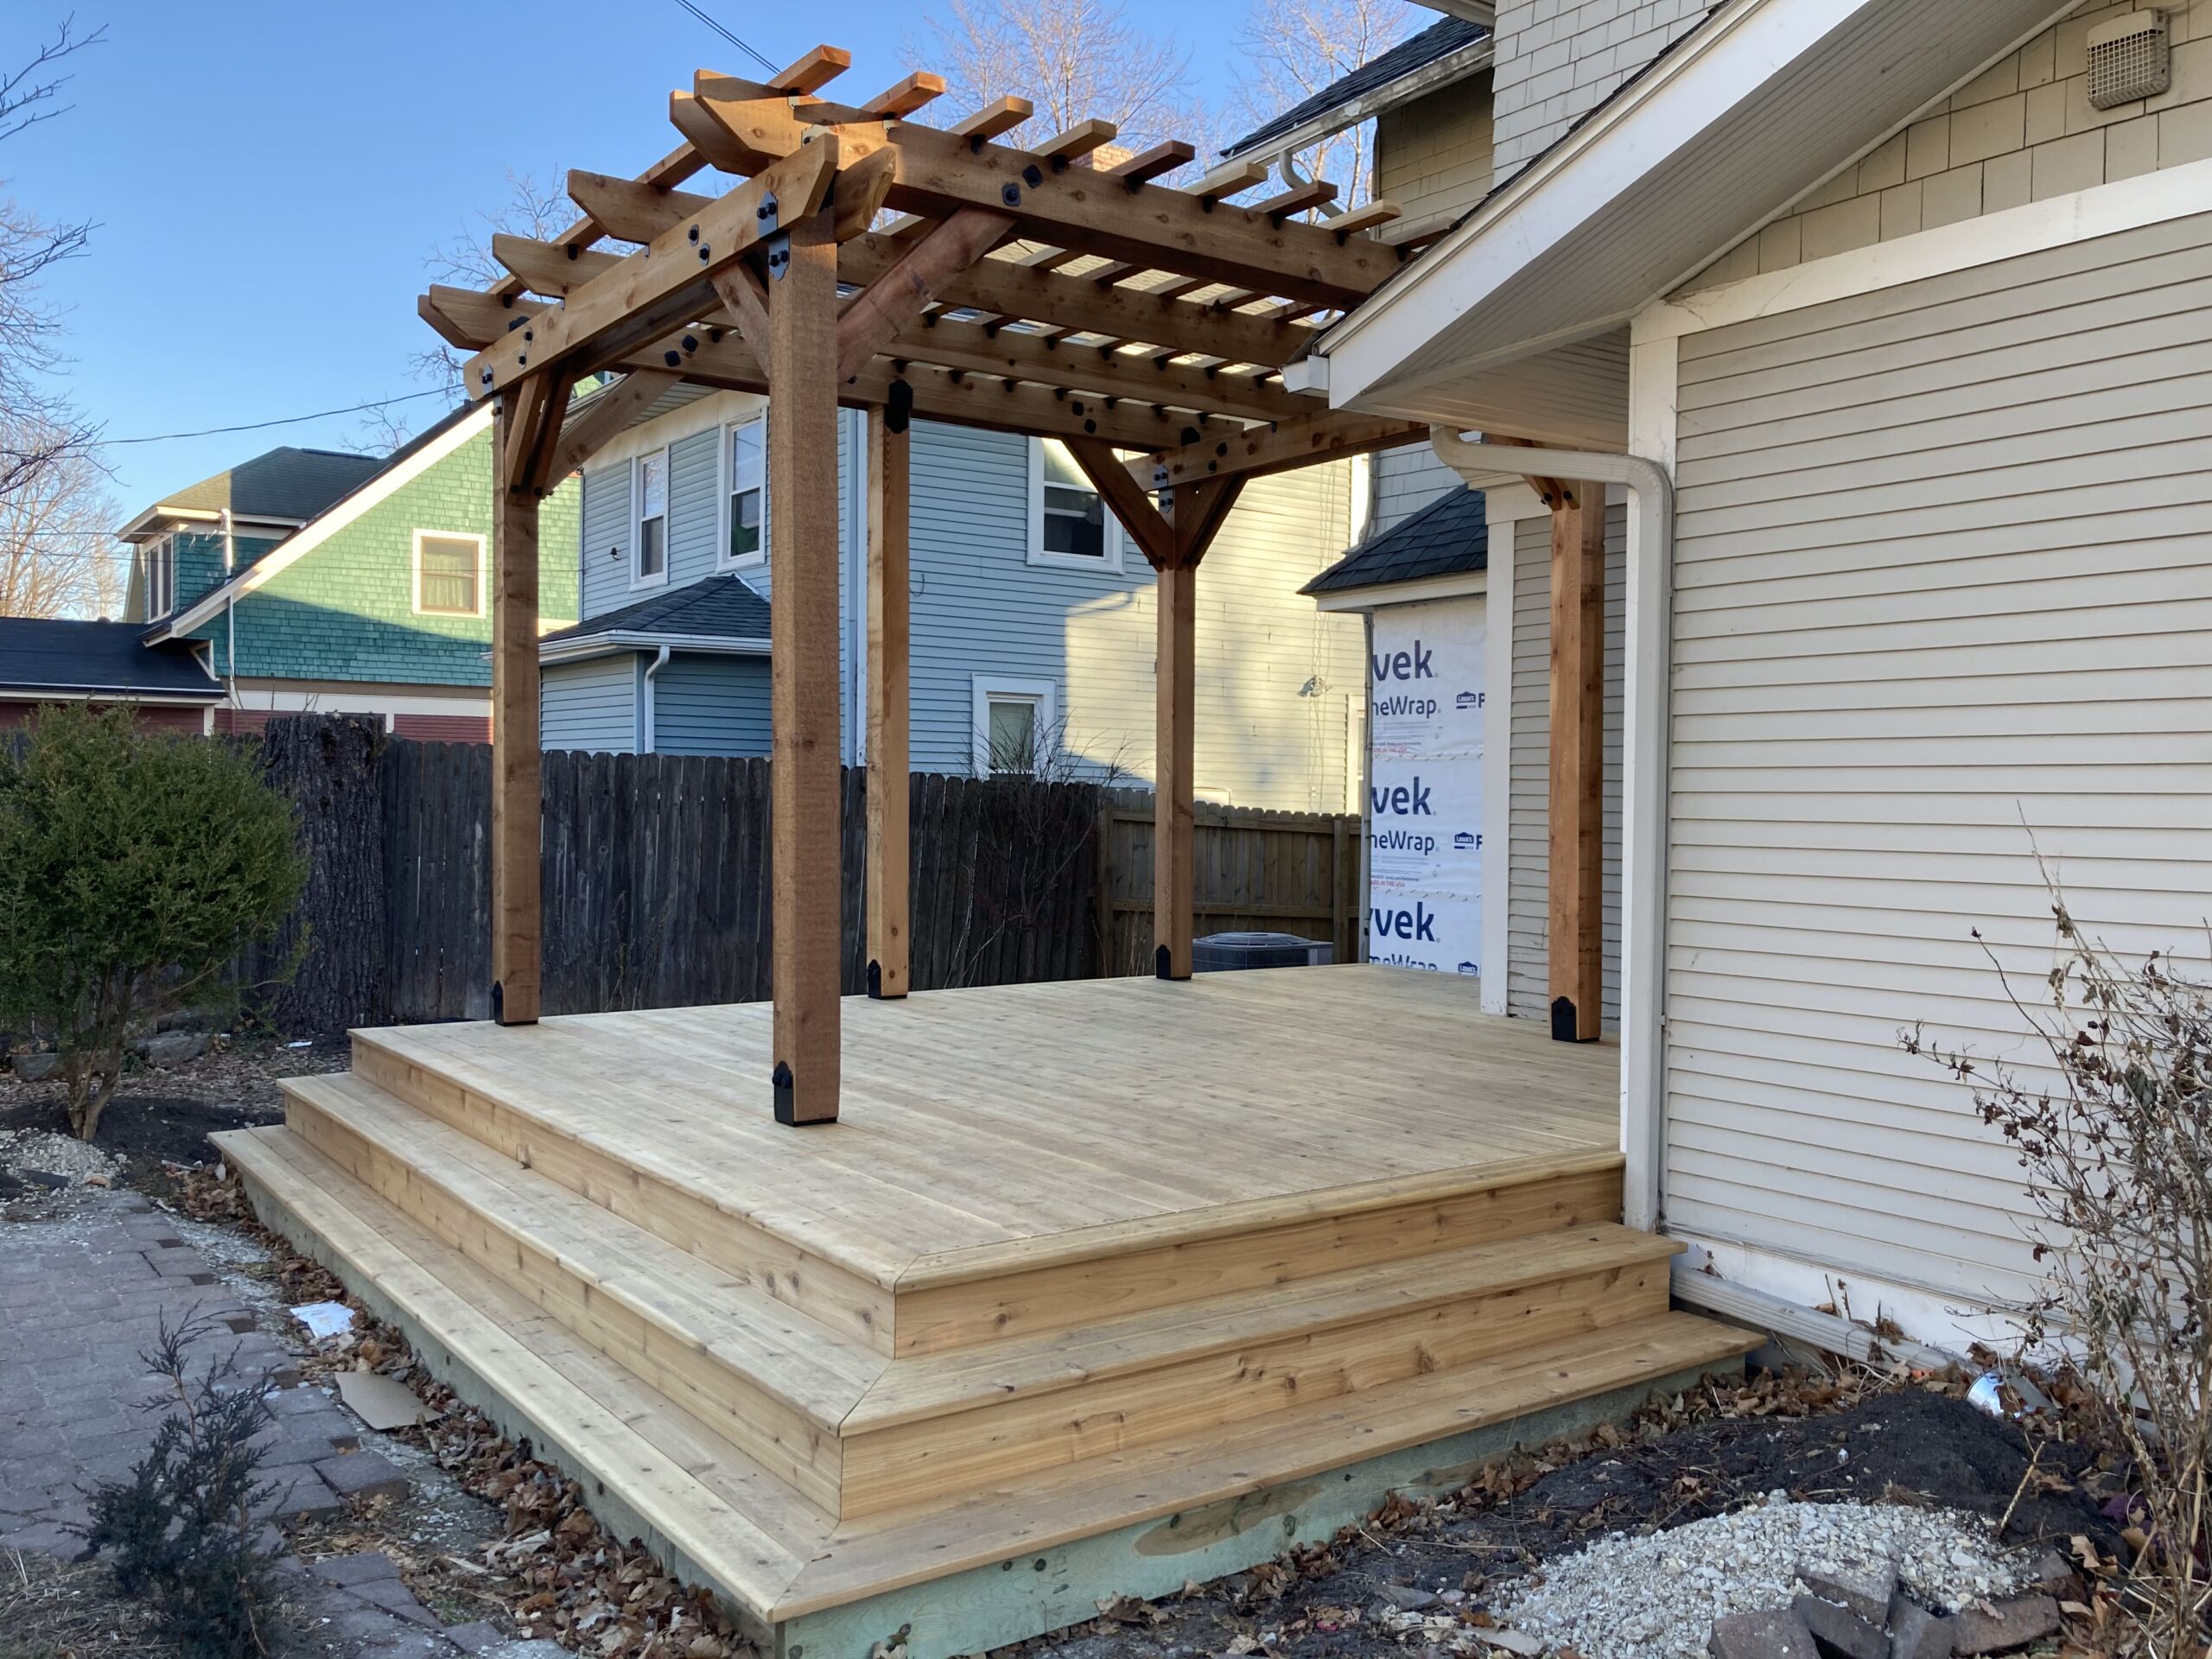 New wooden pergola and deck in backyard of home